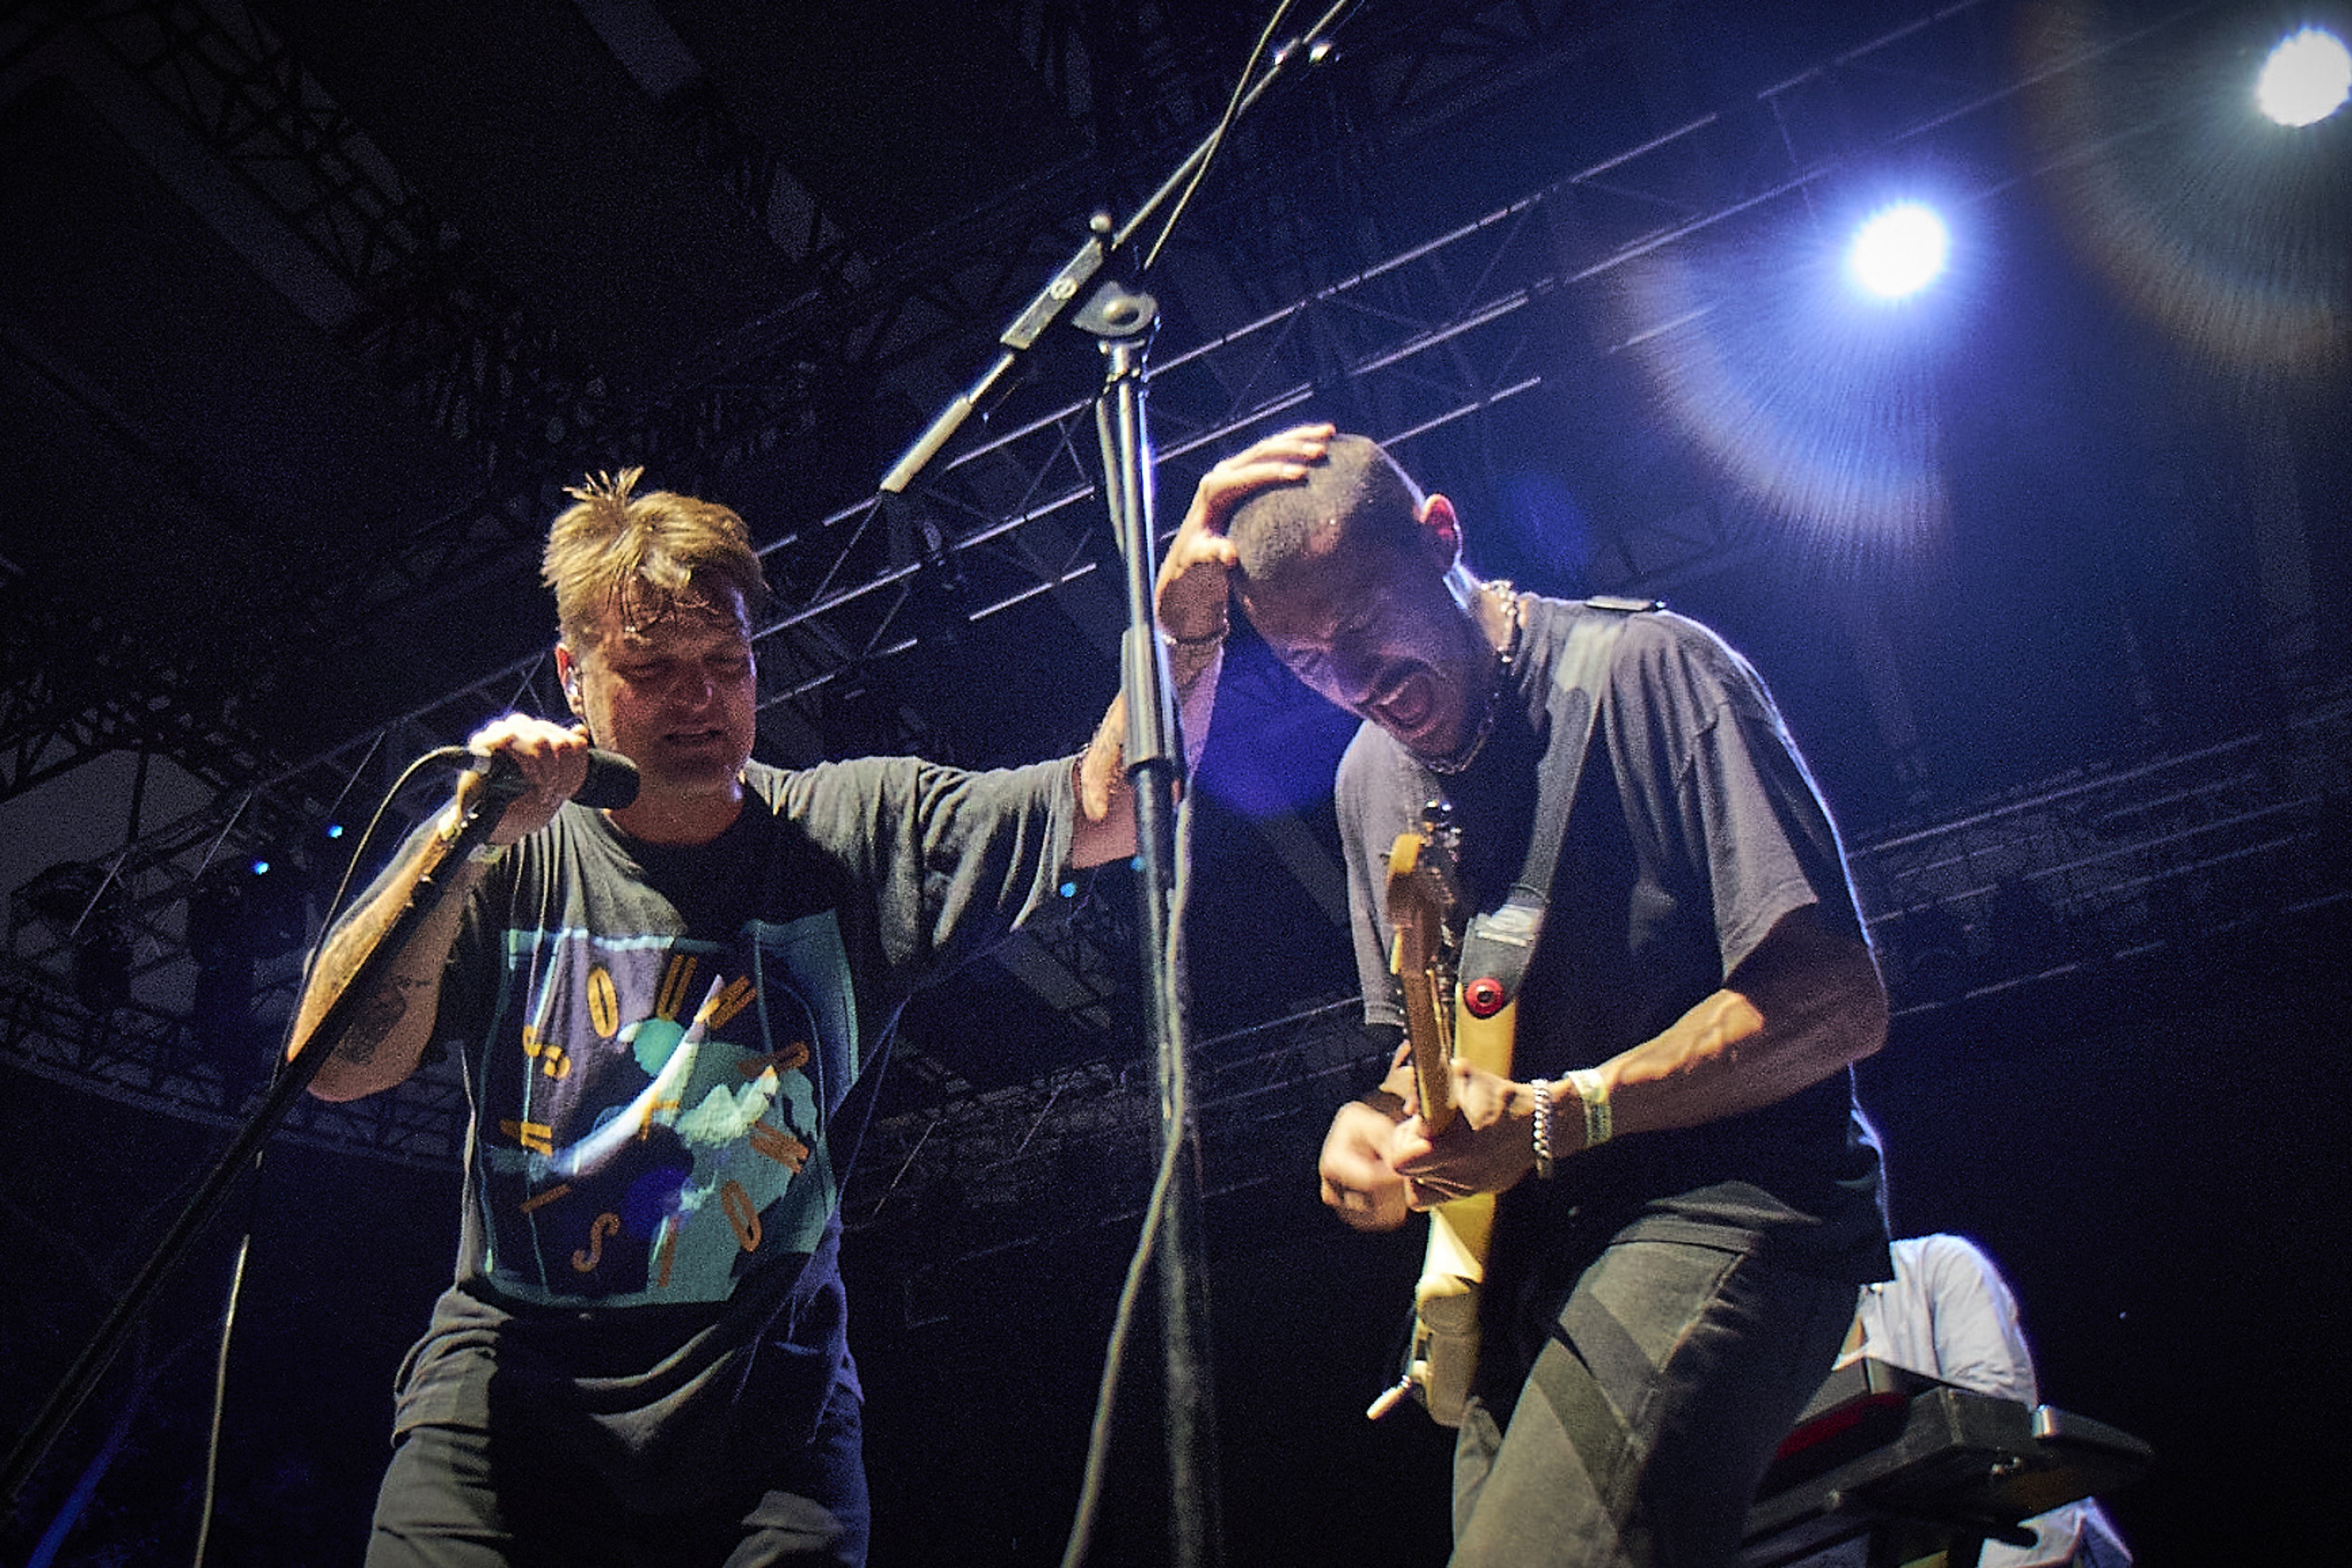 Cold War Kids play mental health benefit in Central Park